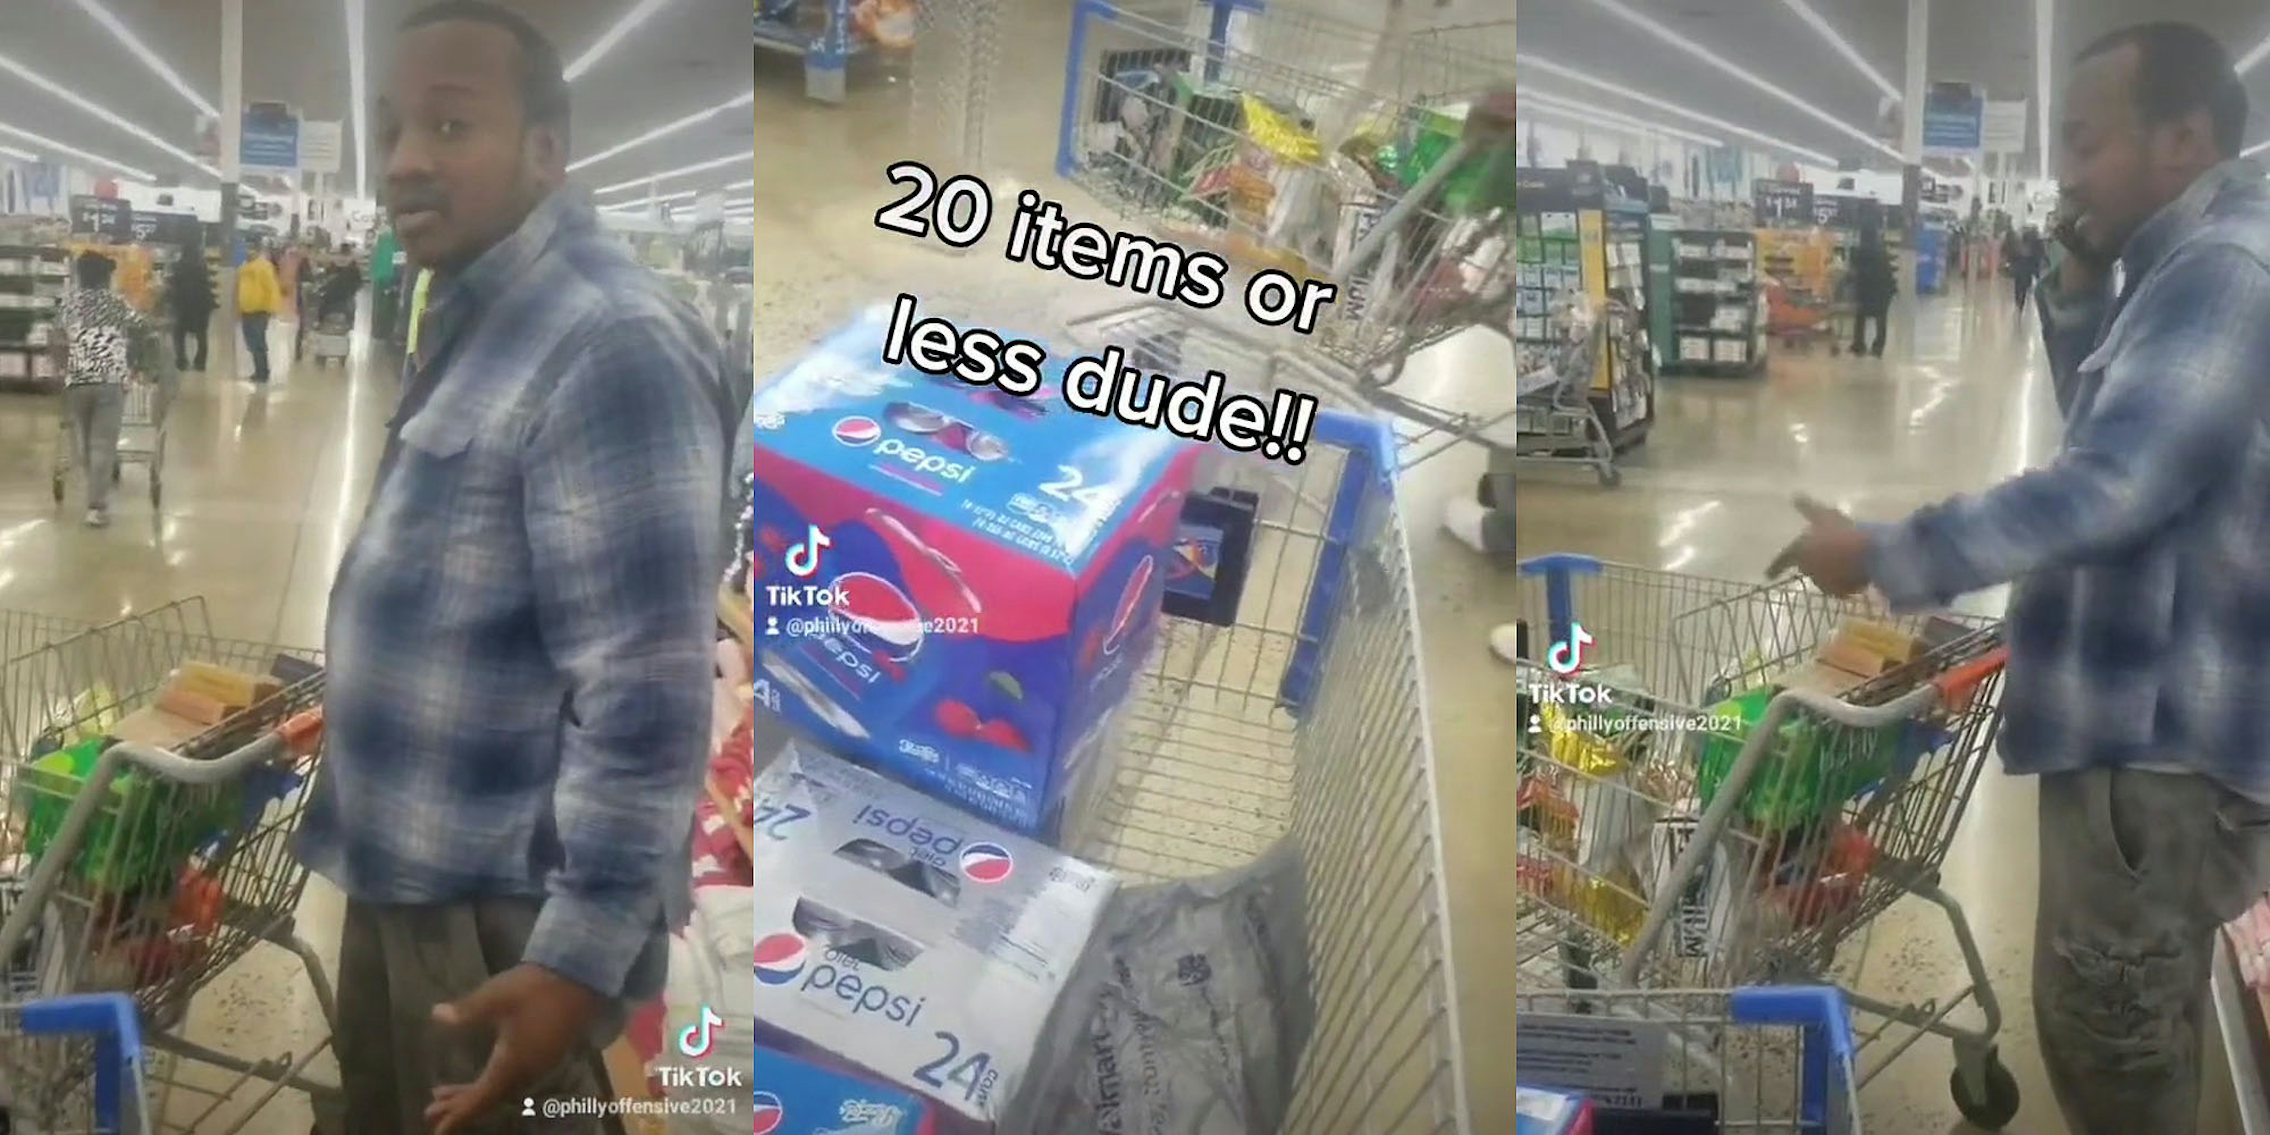 Man in line at Walmart with shopping cart lots of items (l) cameraman cart and other mans cart with caption '20 items or less dude!!' (c) Man at Walmart shopping cart full on phone while pointing to cart (r)